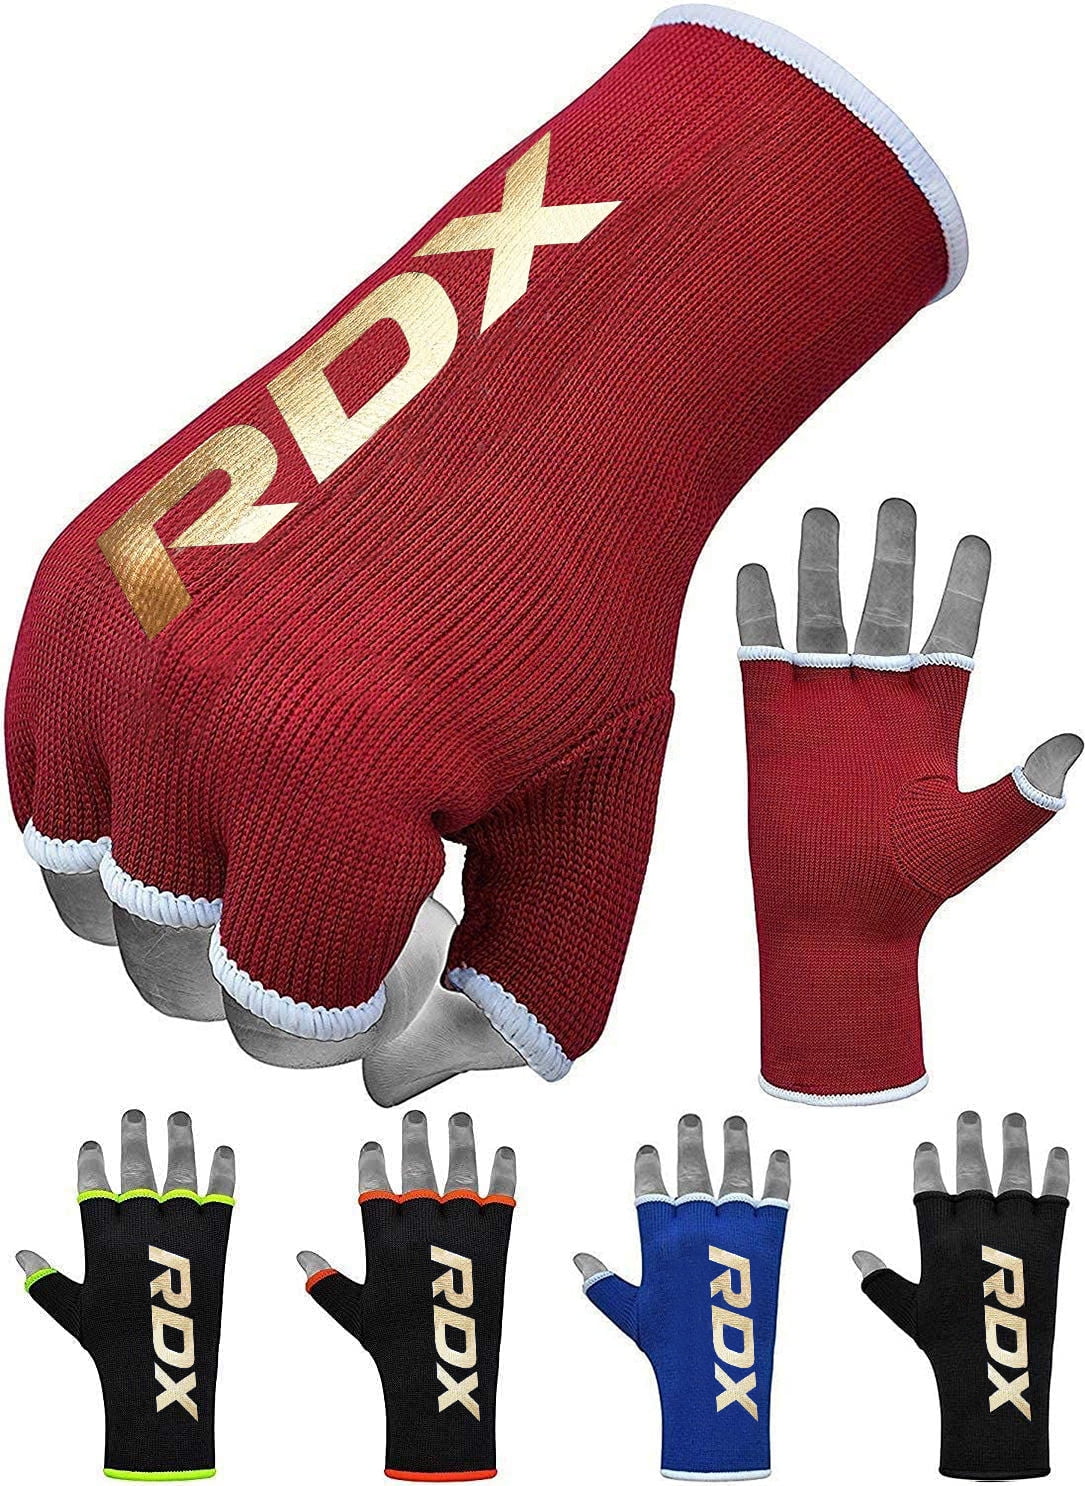 MRX Boxing Hand Wraps Bandages Fist Inner Gloves Mexican Mma Muay Thai 1 Pair 